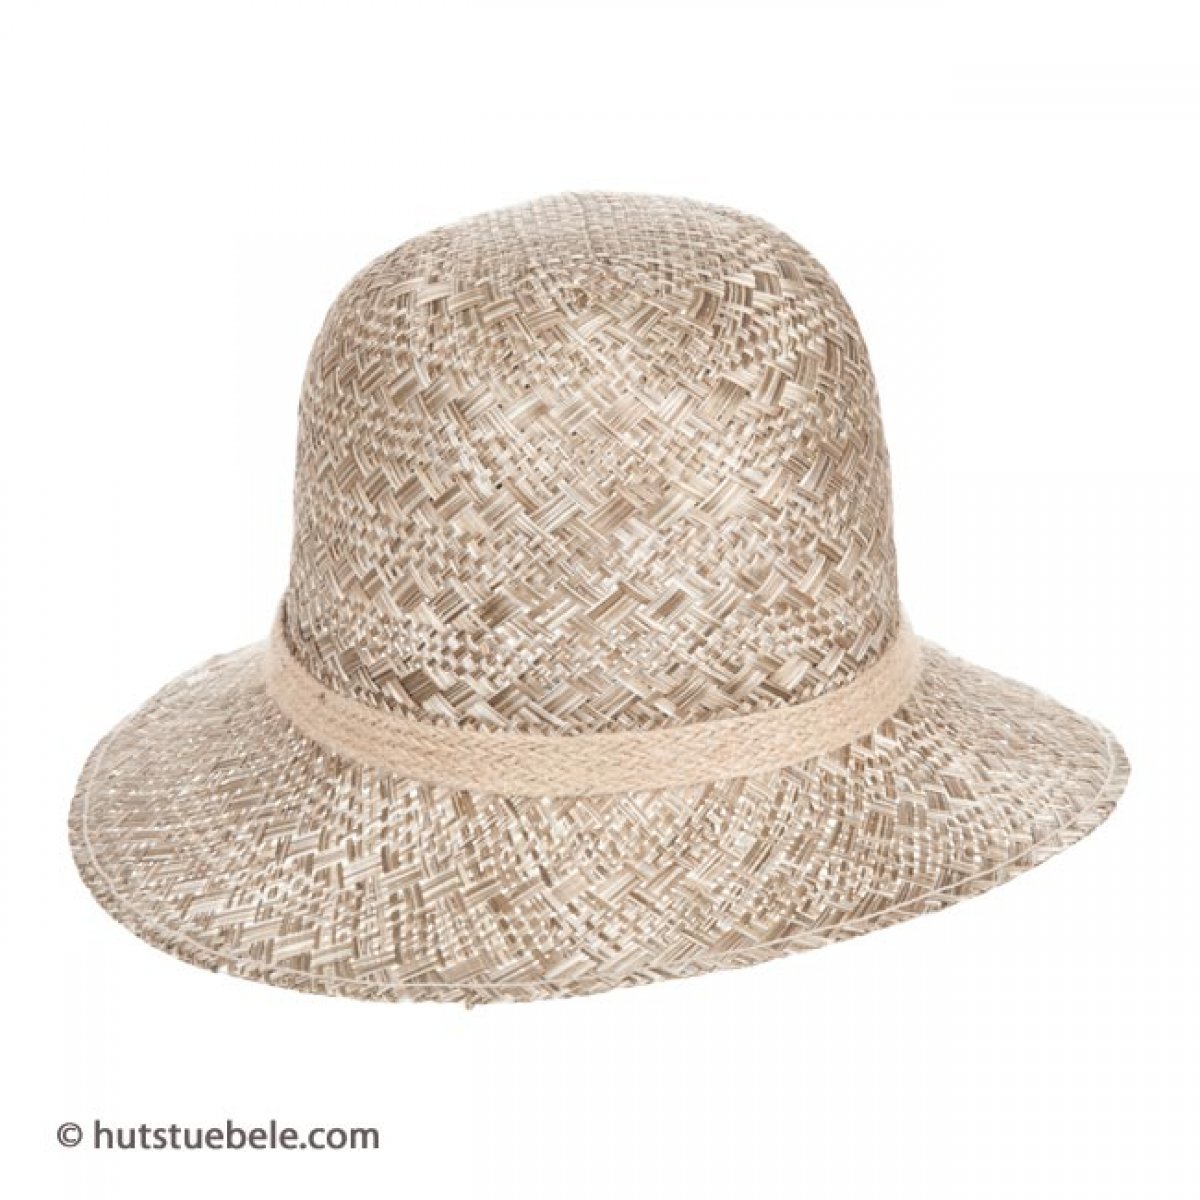 https://pic.hutstuebele.com/ladies-hat-in-straw-with-a-small-brim.40407a.jpg